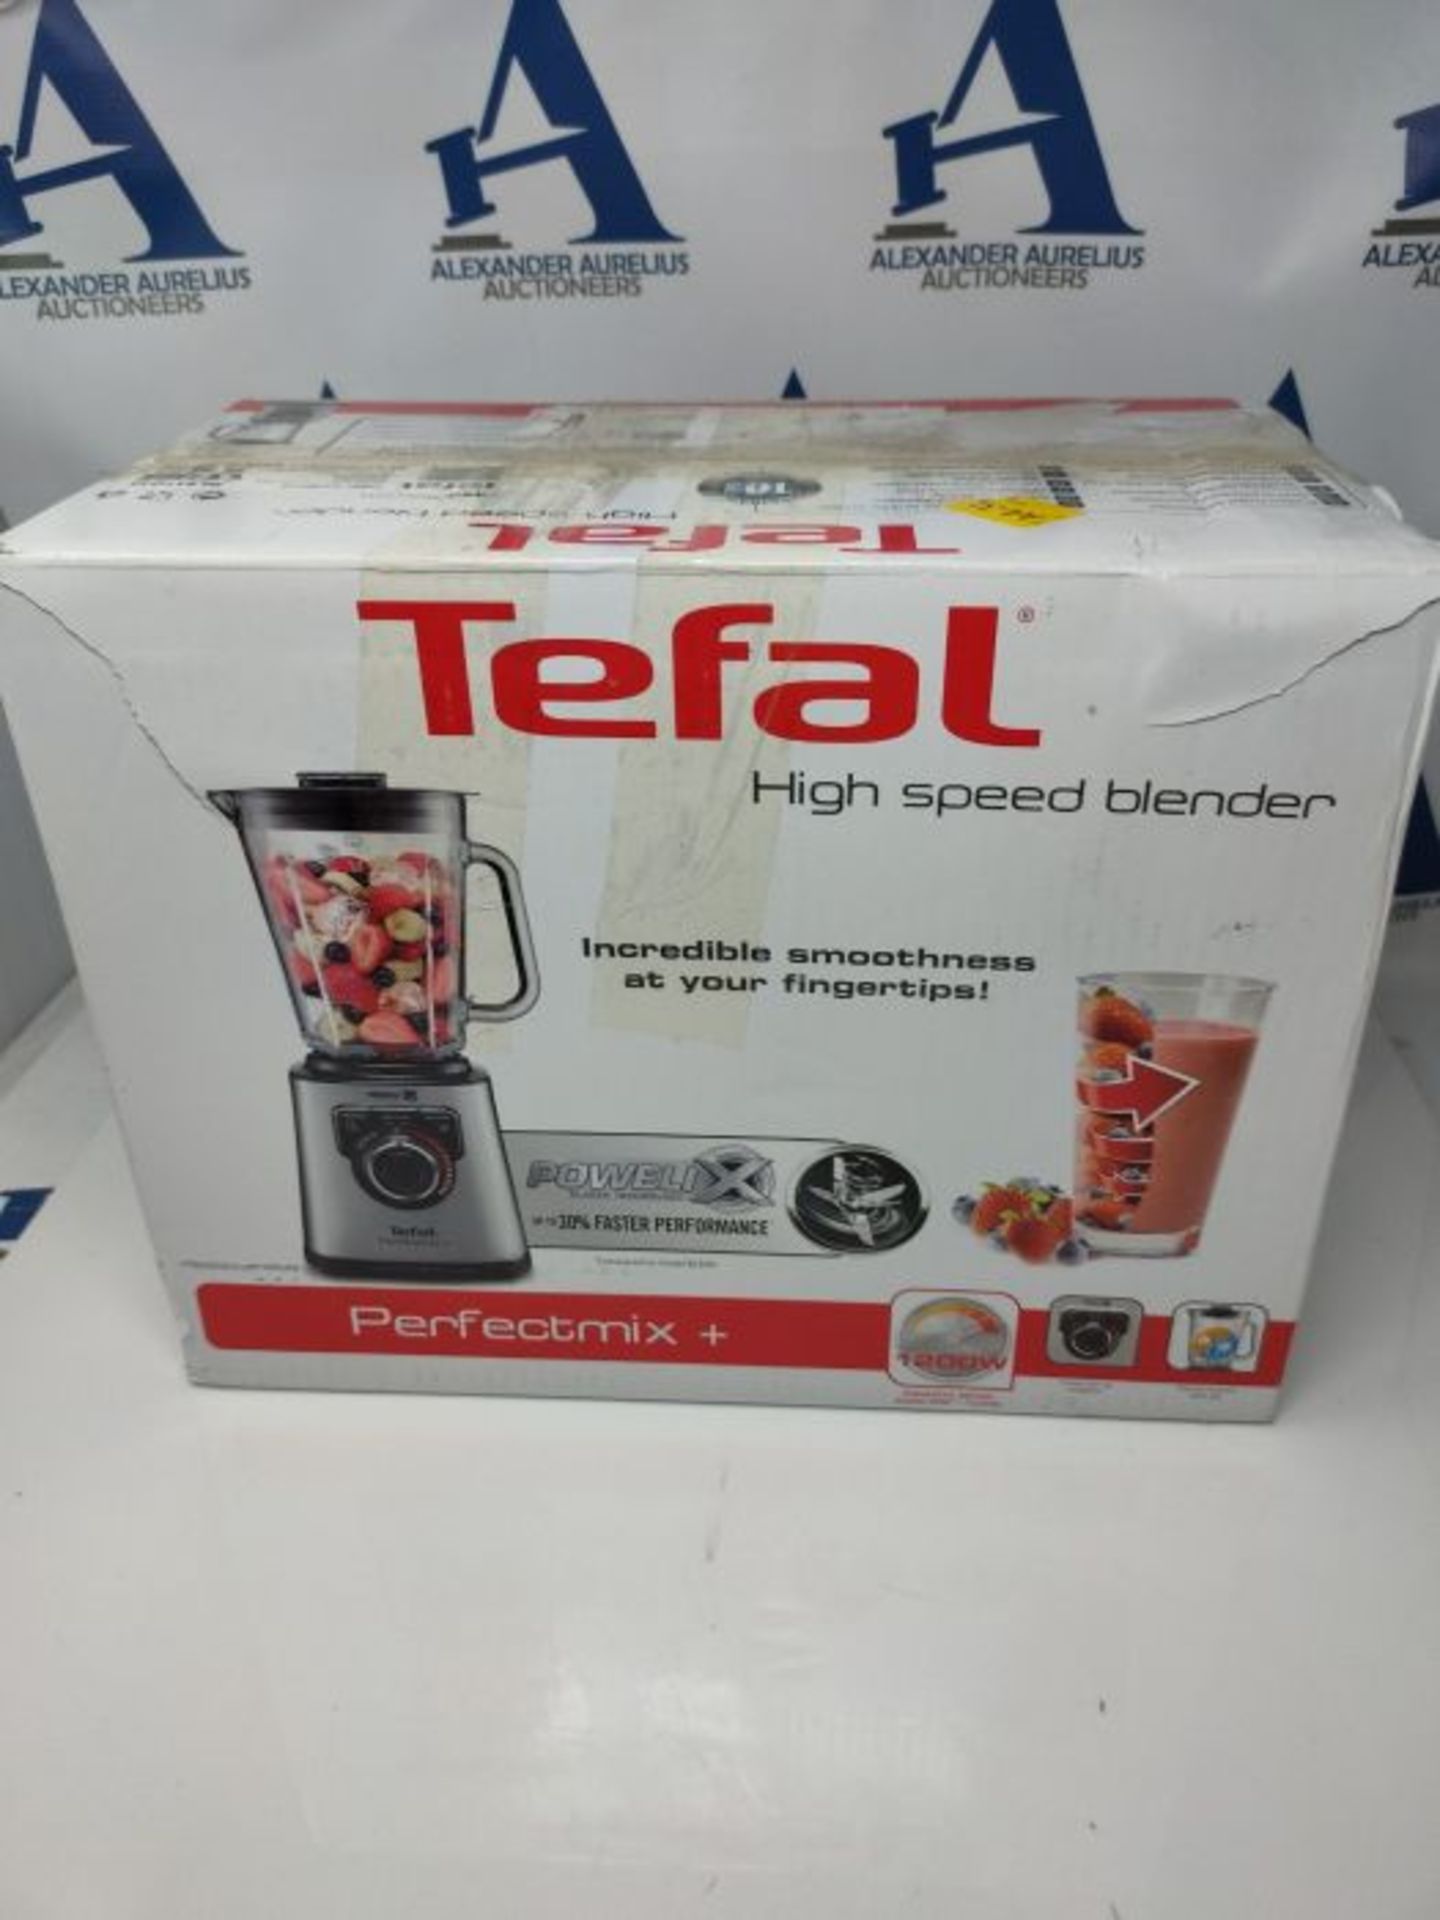 RRP £67.00 Tefal PerfectMix BL811D40 High-Speed Blender, Powelix Blades, Stainless Steel, 1200 W - Image 2 of 3